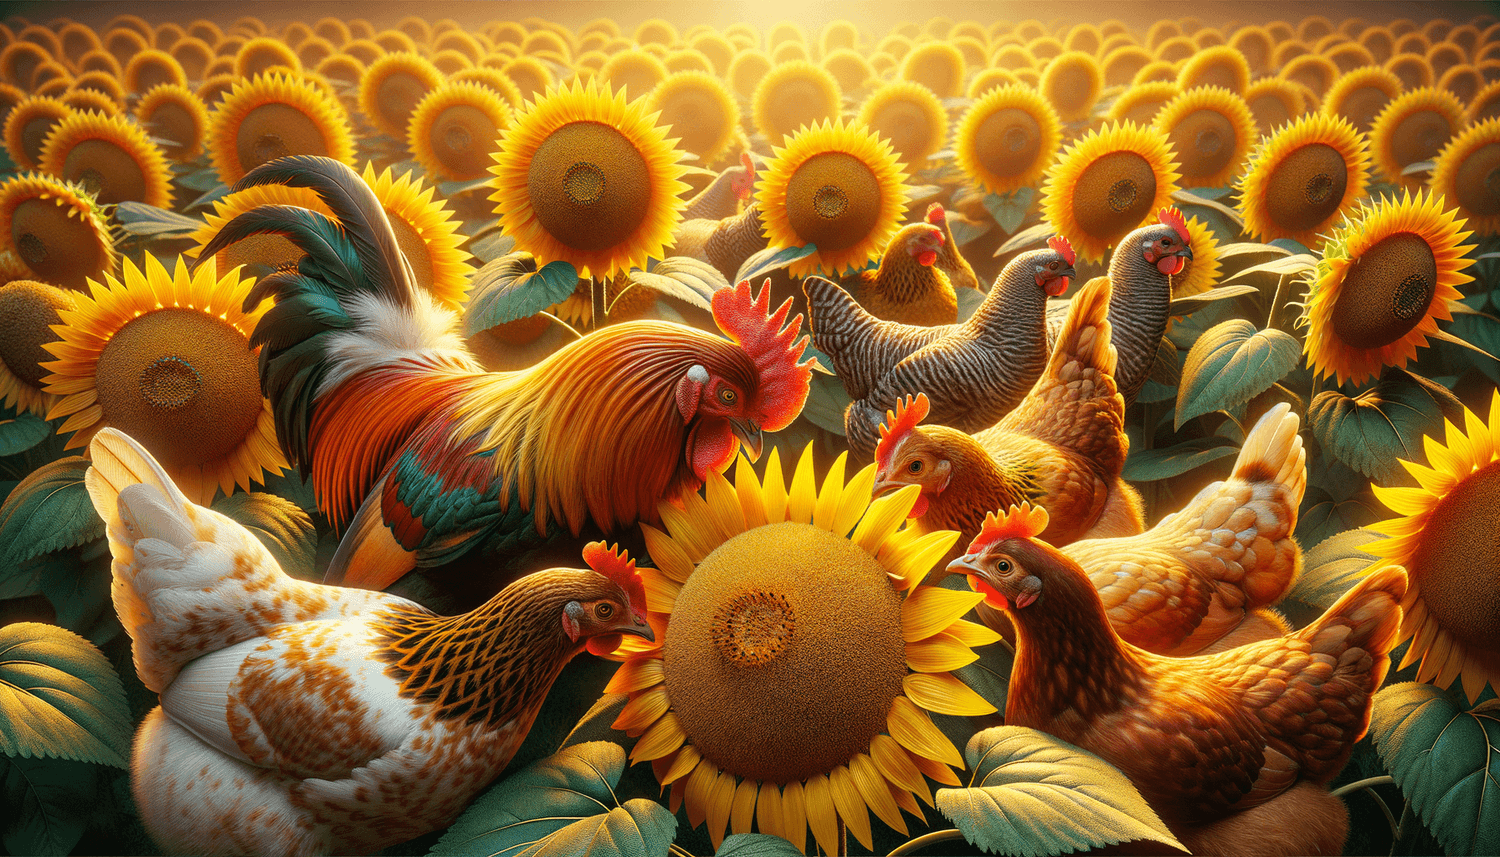 Can Chickens Eat Sunflowers?